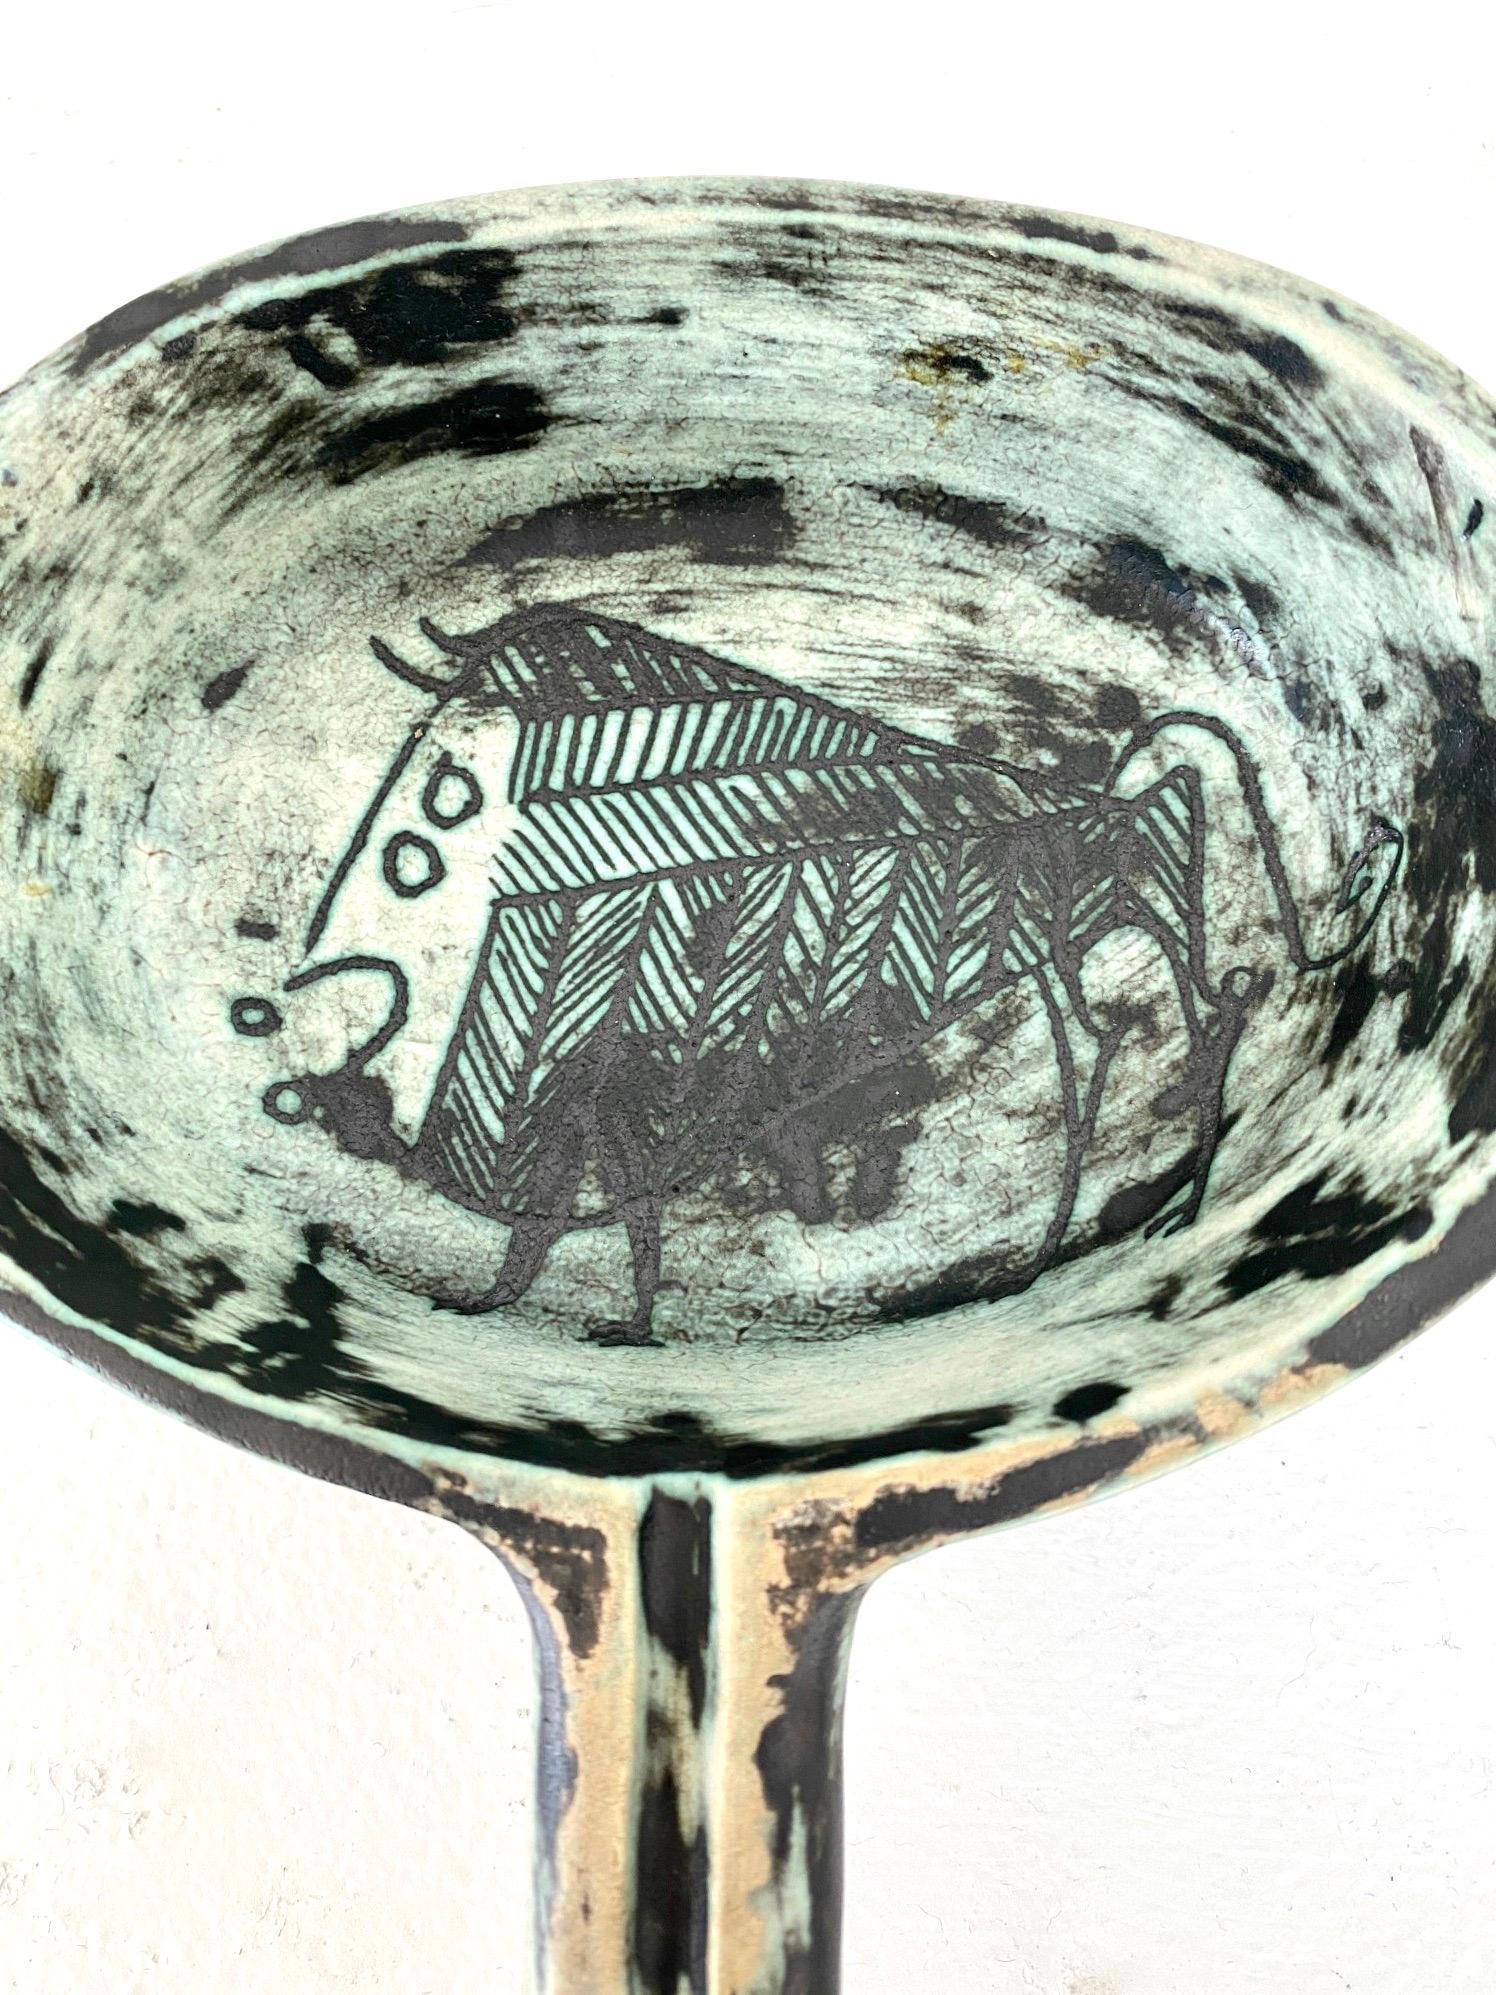 A French ceramic vide poche or small handled bowl by noted French ceramic artist Jacques Blin.
The iconic image of a bull or toro is expressed in Blin's wonderful scrafitto markings. This bowl or dish or vide poche is in the paler blue color with